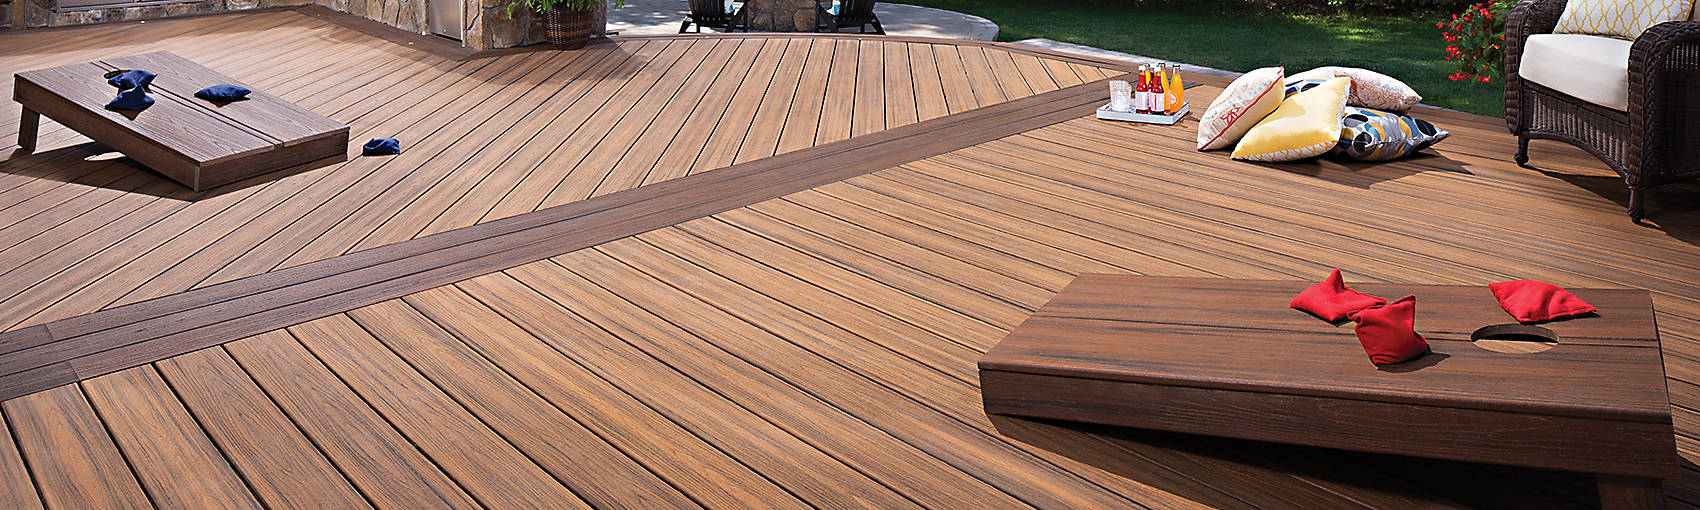 Composite Decking Wpc Wood Alternative Decking Trex within measurements 1700 X 510